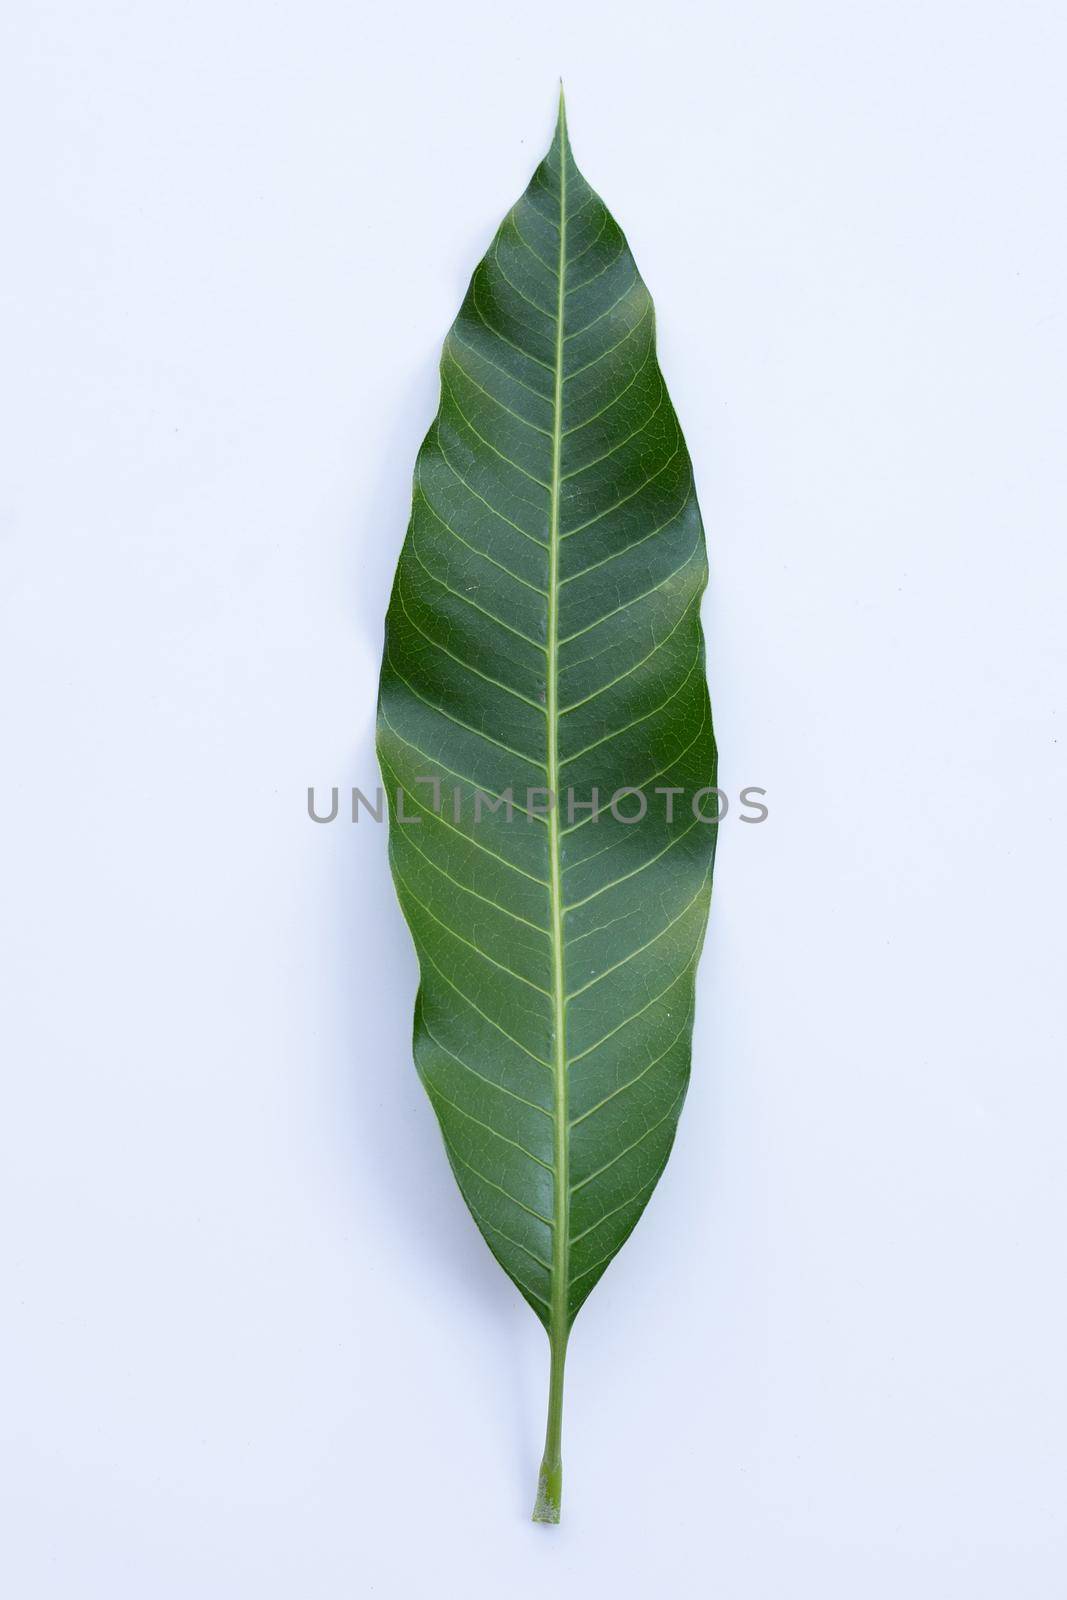 Top view of mango leaf on white background. by Bowonpat